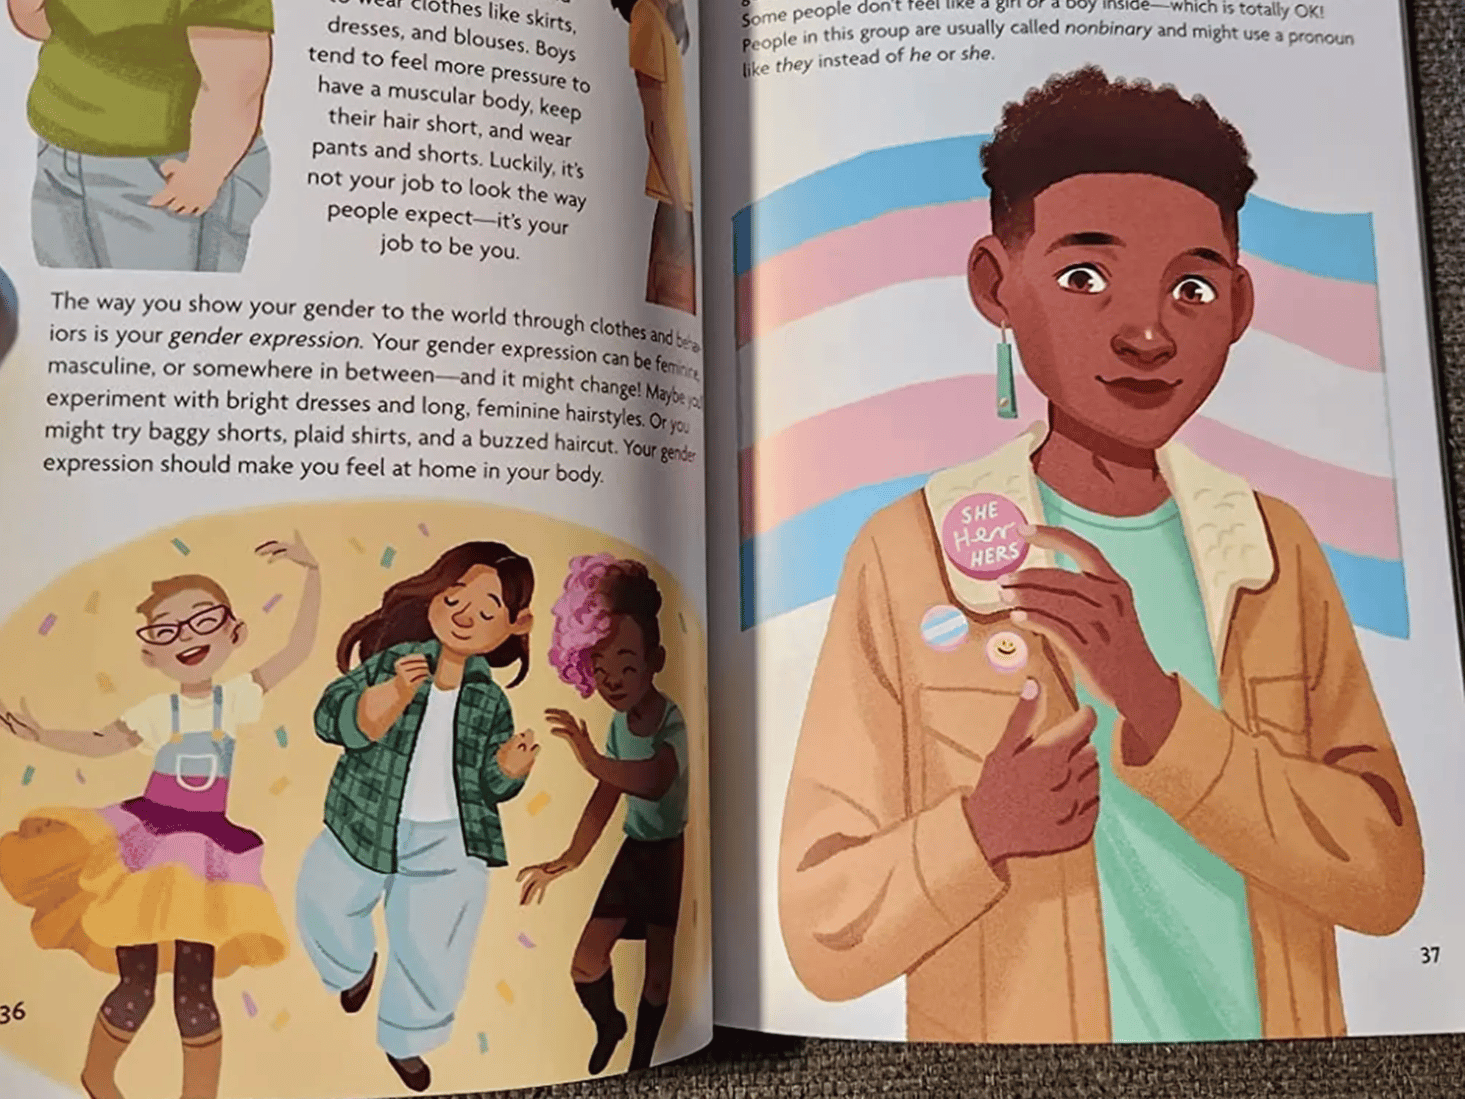 American Girl angers parents with book teaching 3 year olds about “gender expression”